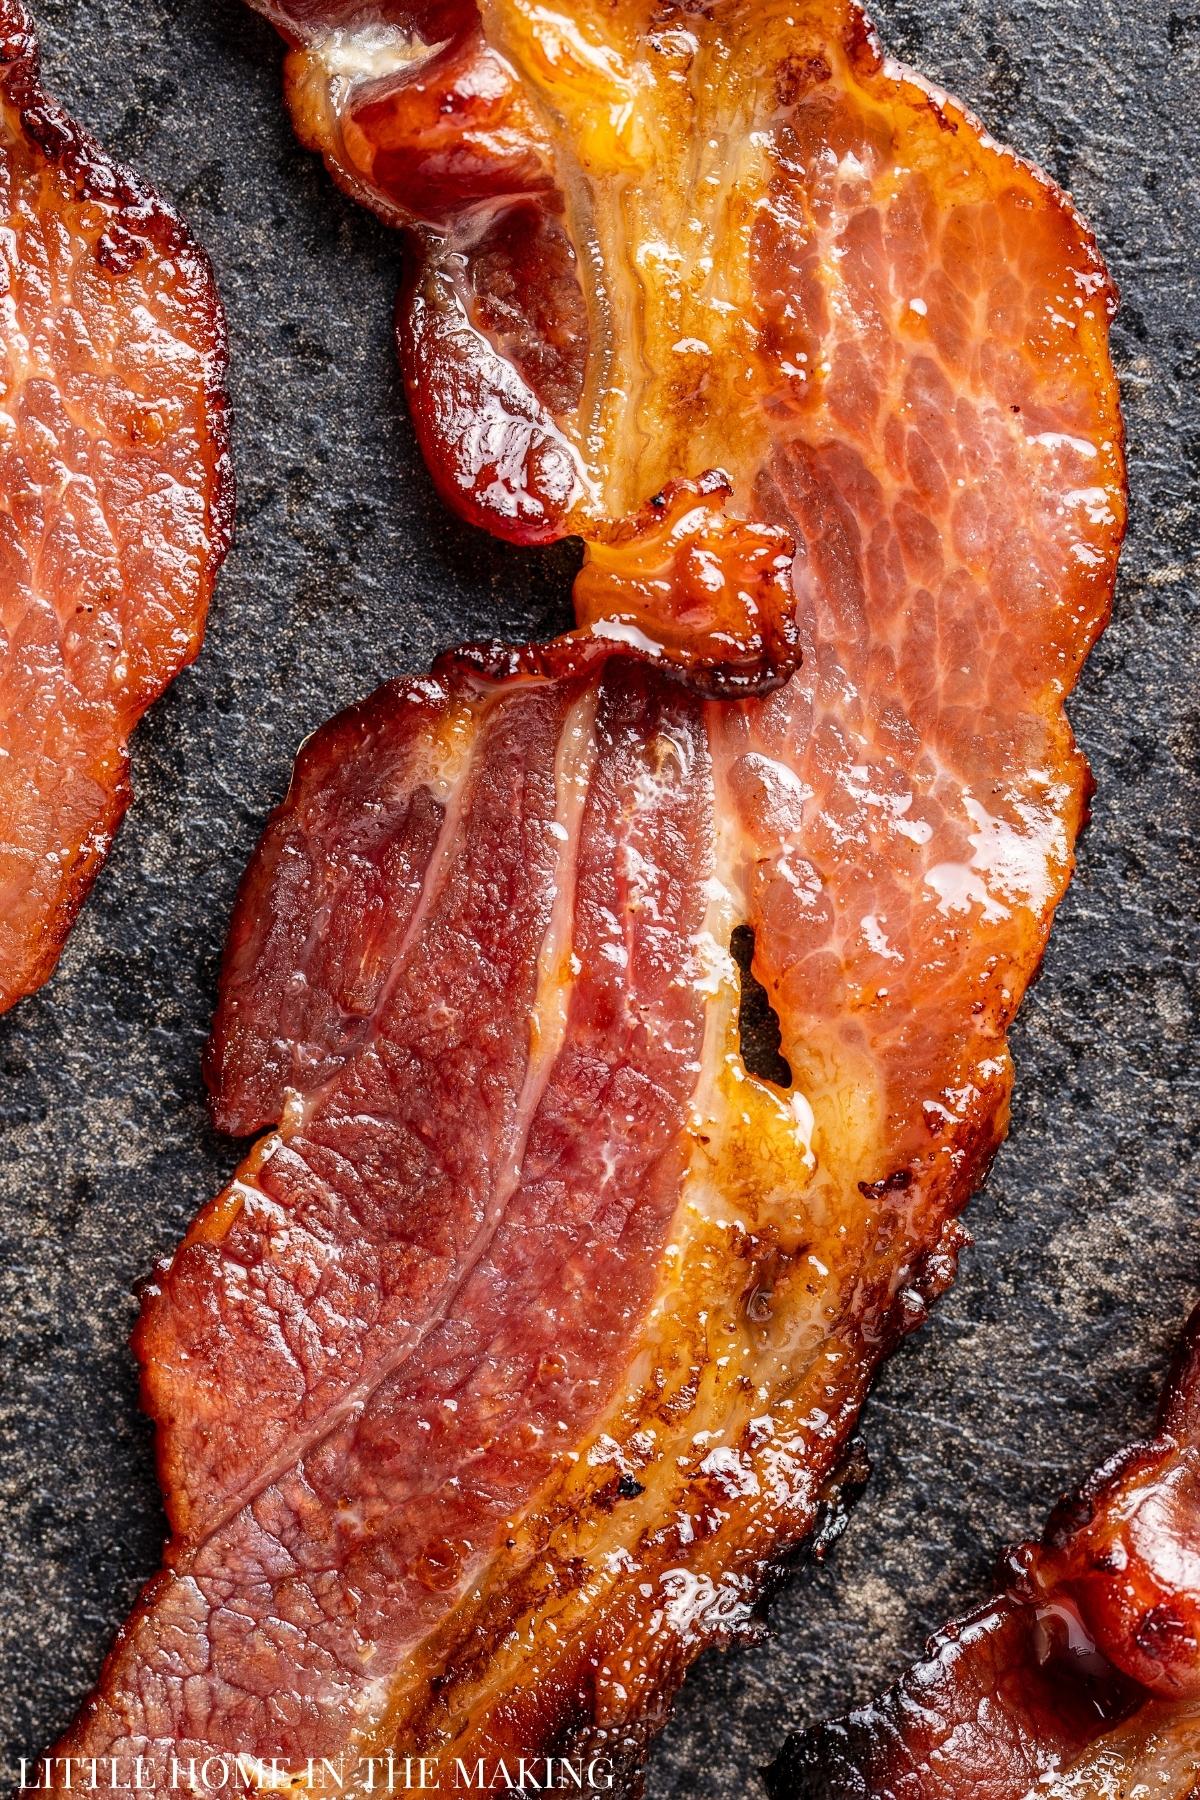 A slice of fully cooked bacon on a dark surface.